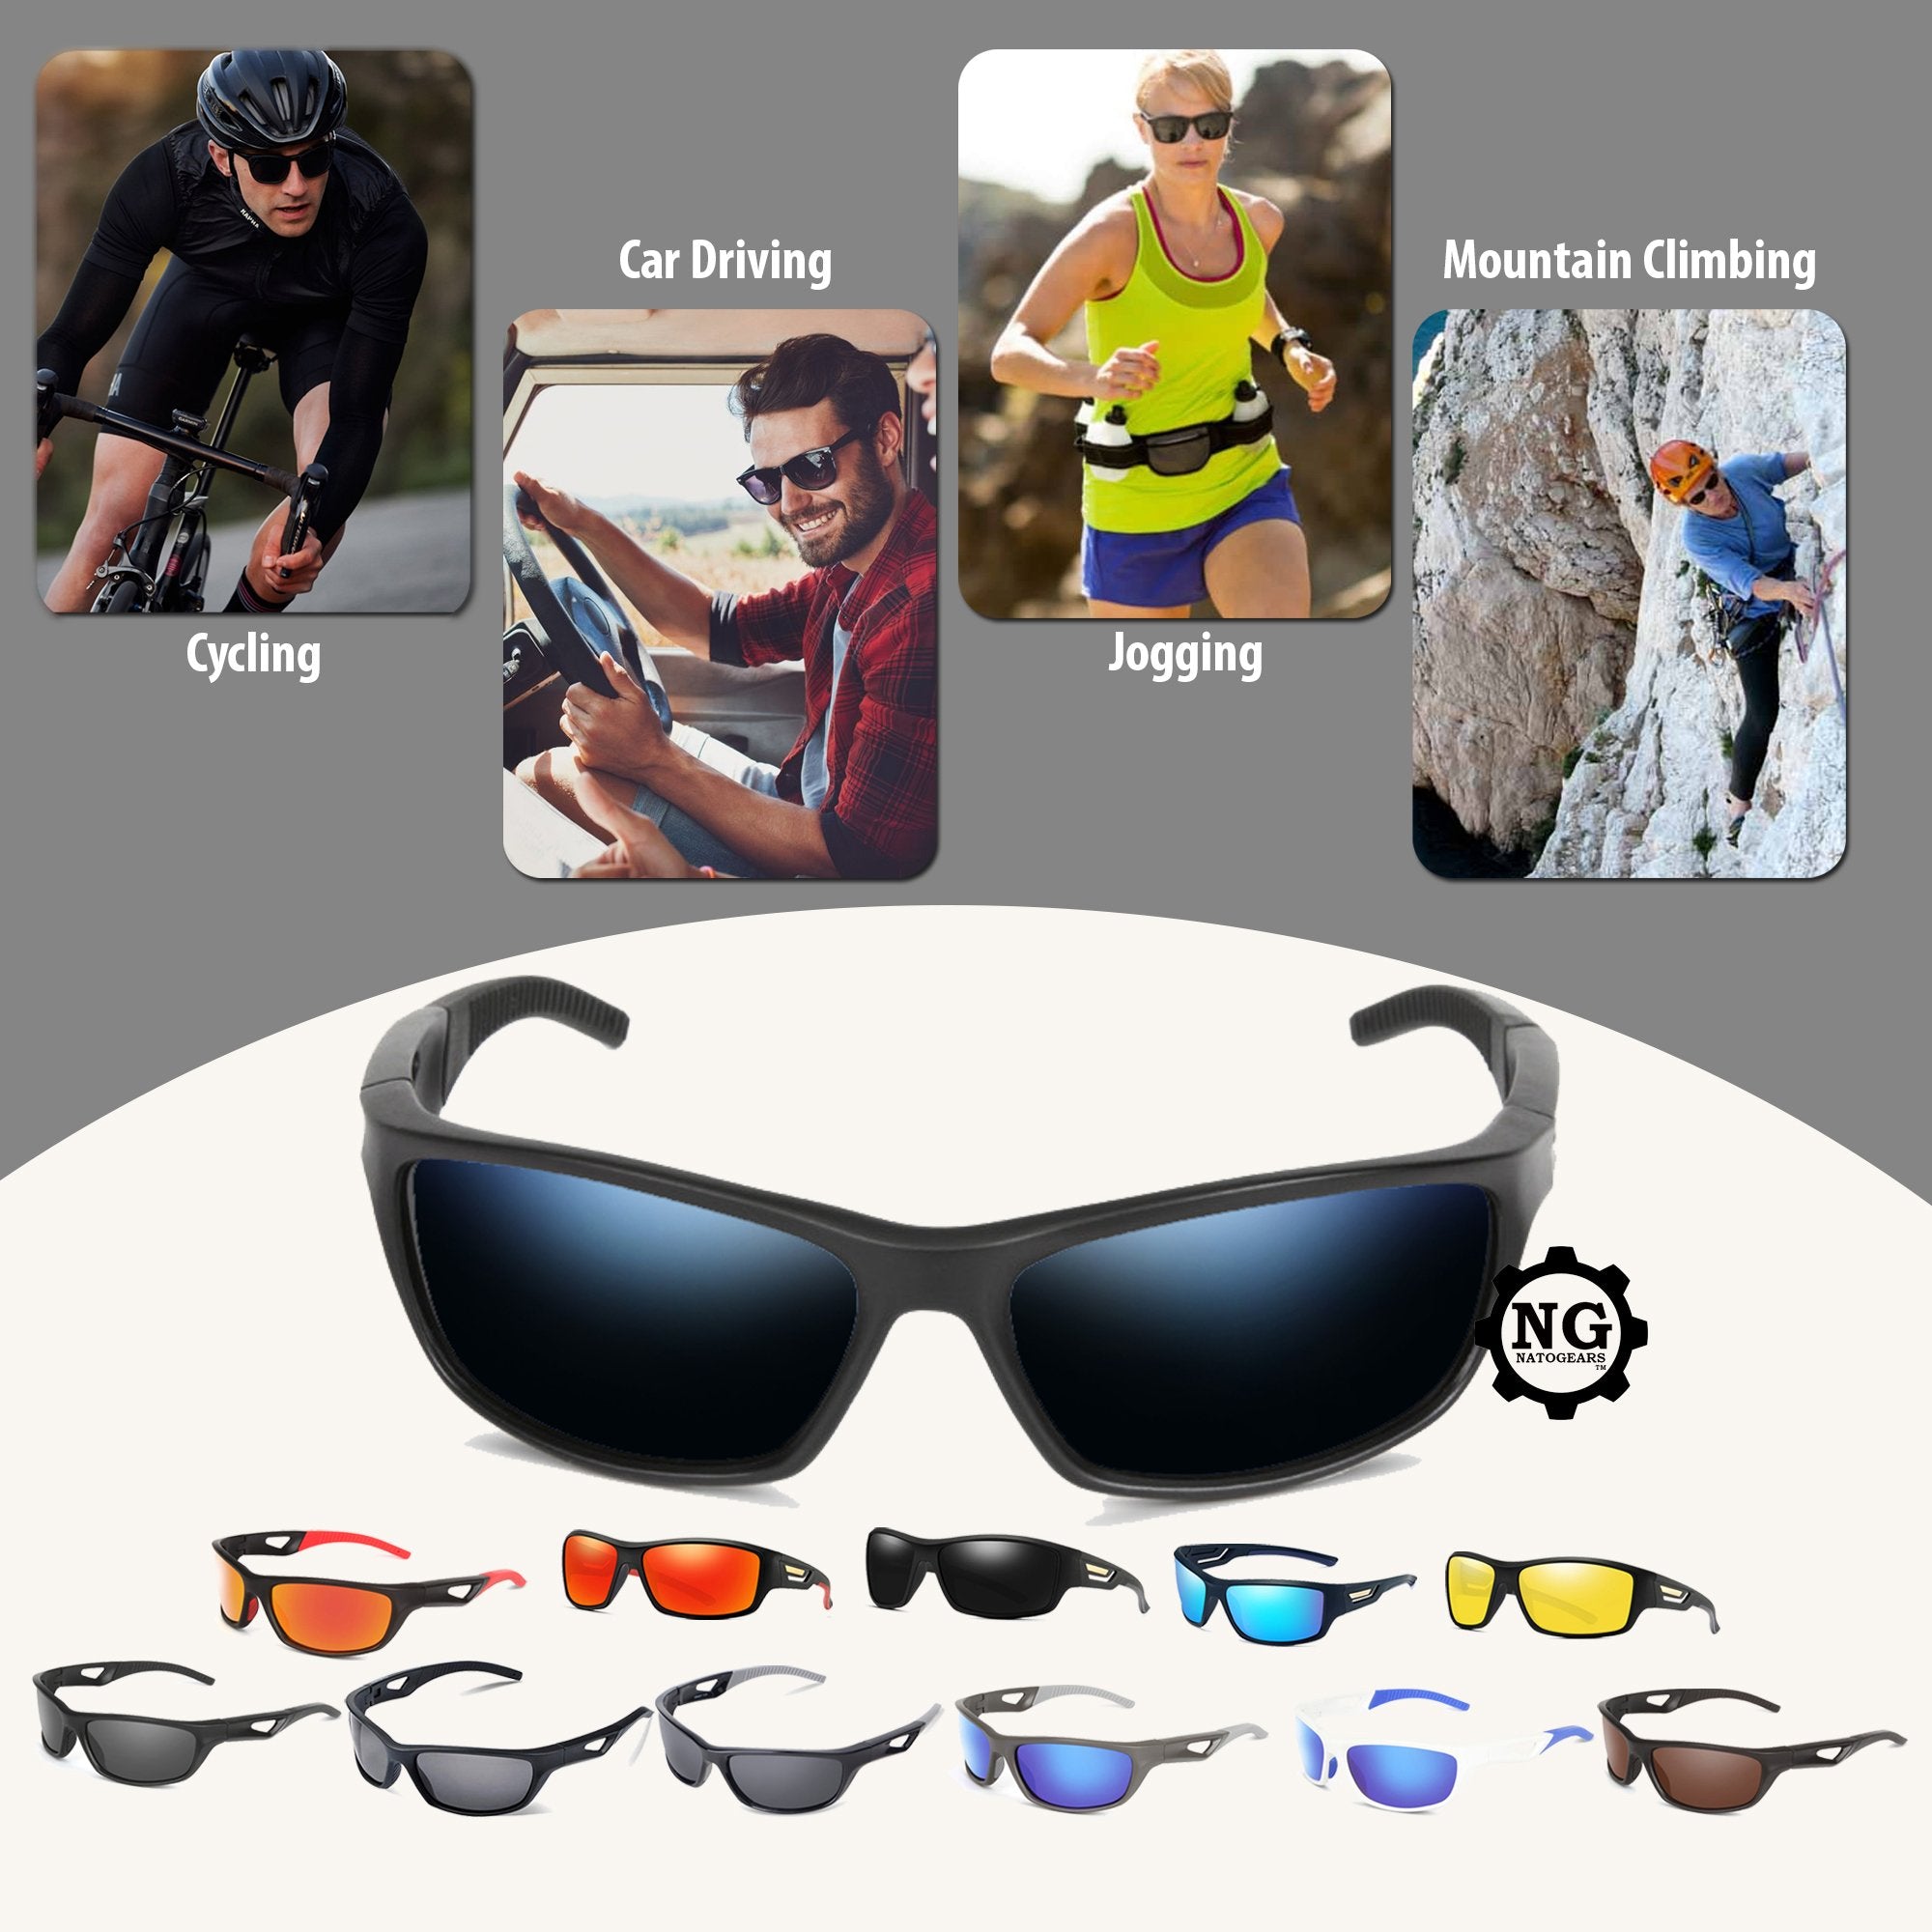 New Sports Sunglasses Men's Polarized Colorful Film Series Glasses Dust-proof Mirror Cycling Mirror Sunglasses With Glasses Case